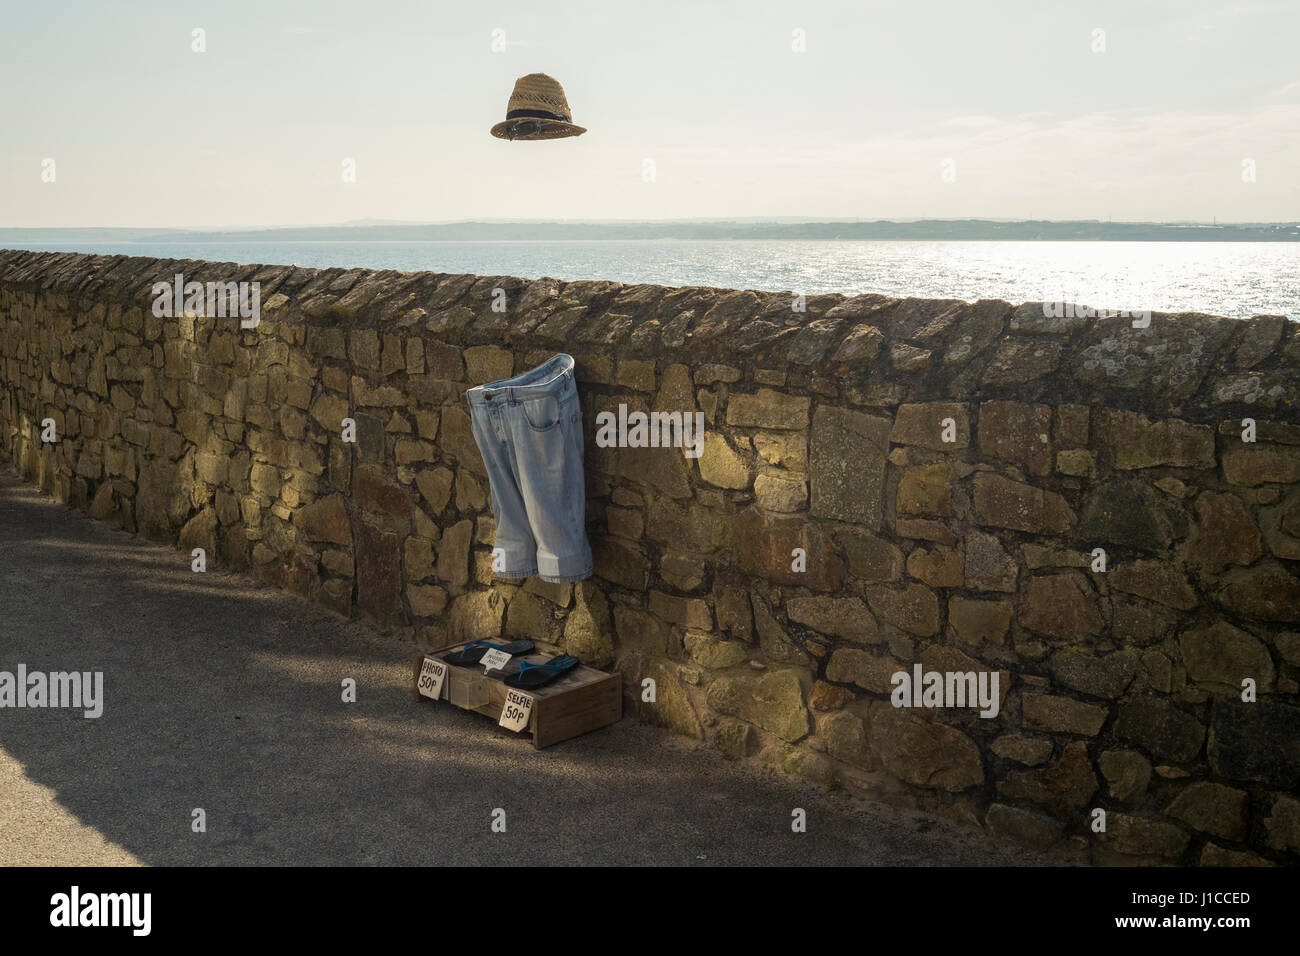 An invisible man installation at St Ives, Cornwall where tourists and locals can take a selife with the invisible man for a donation of 50p. Stock Photo